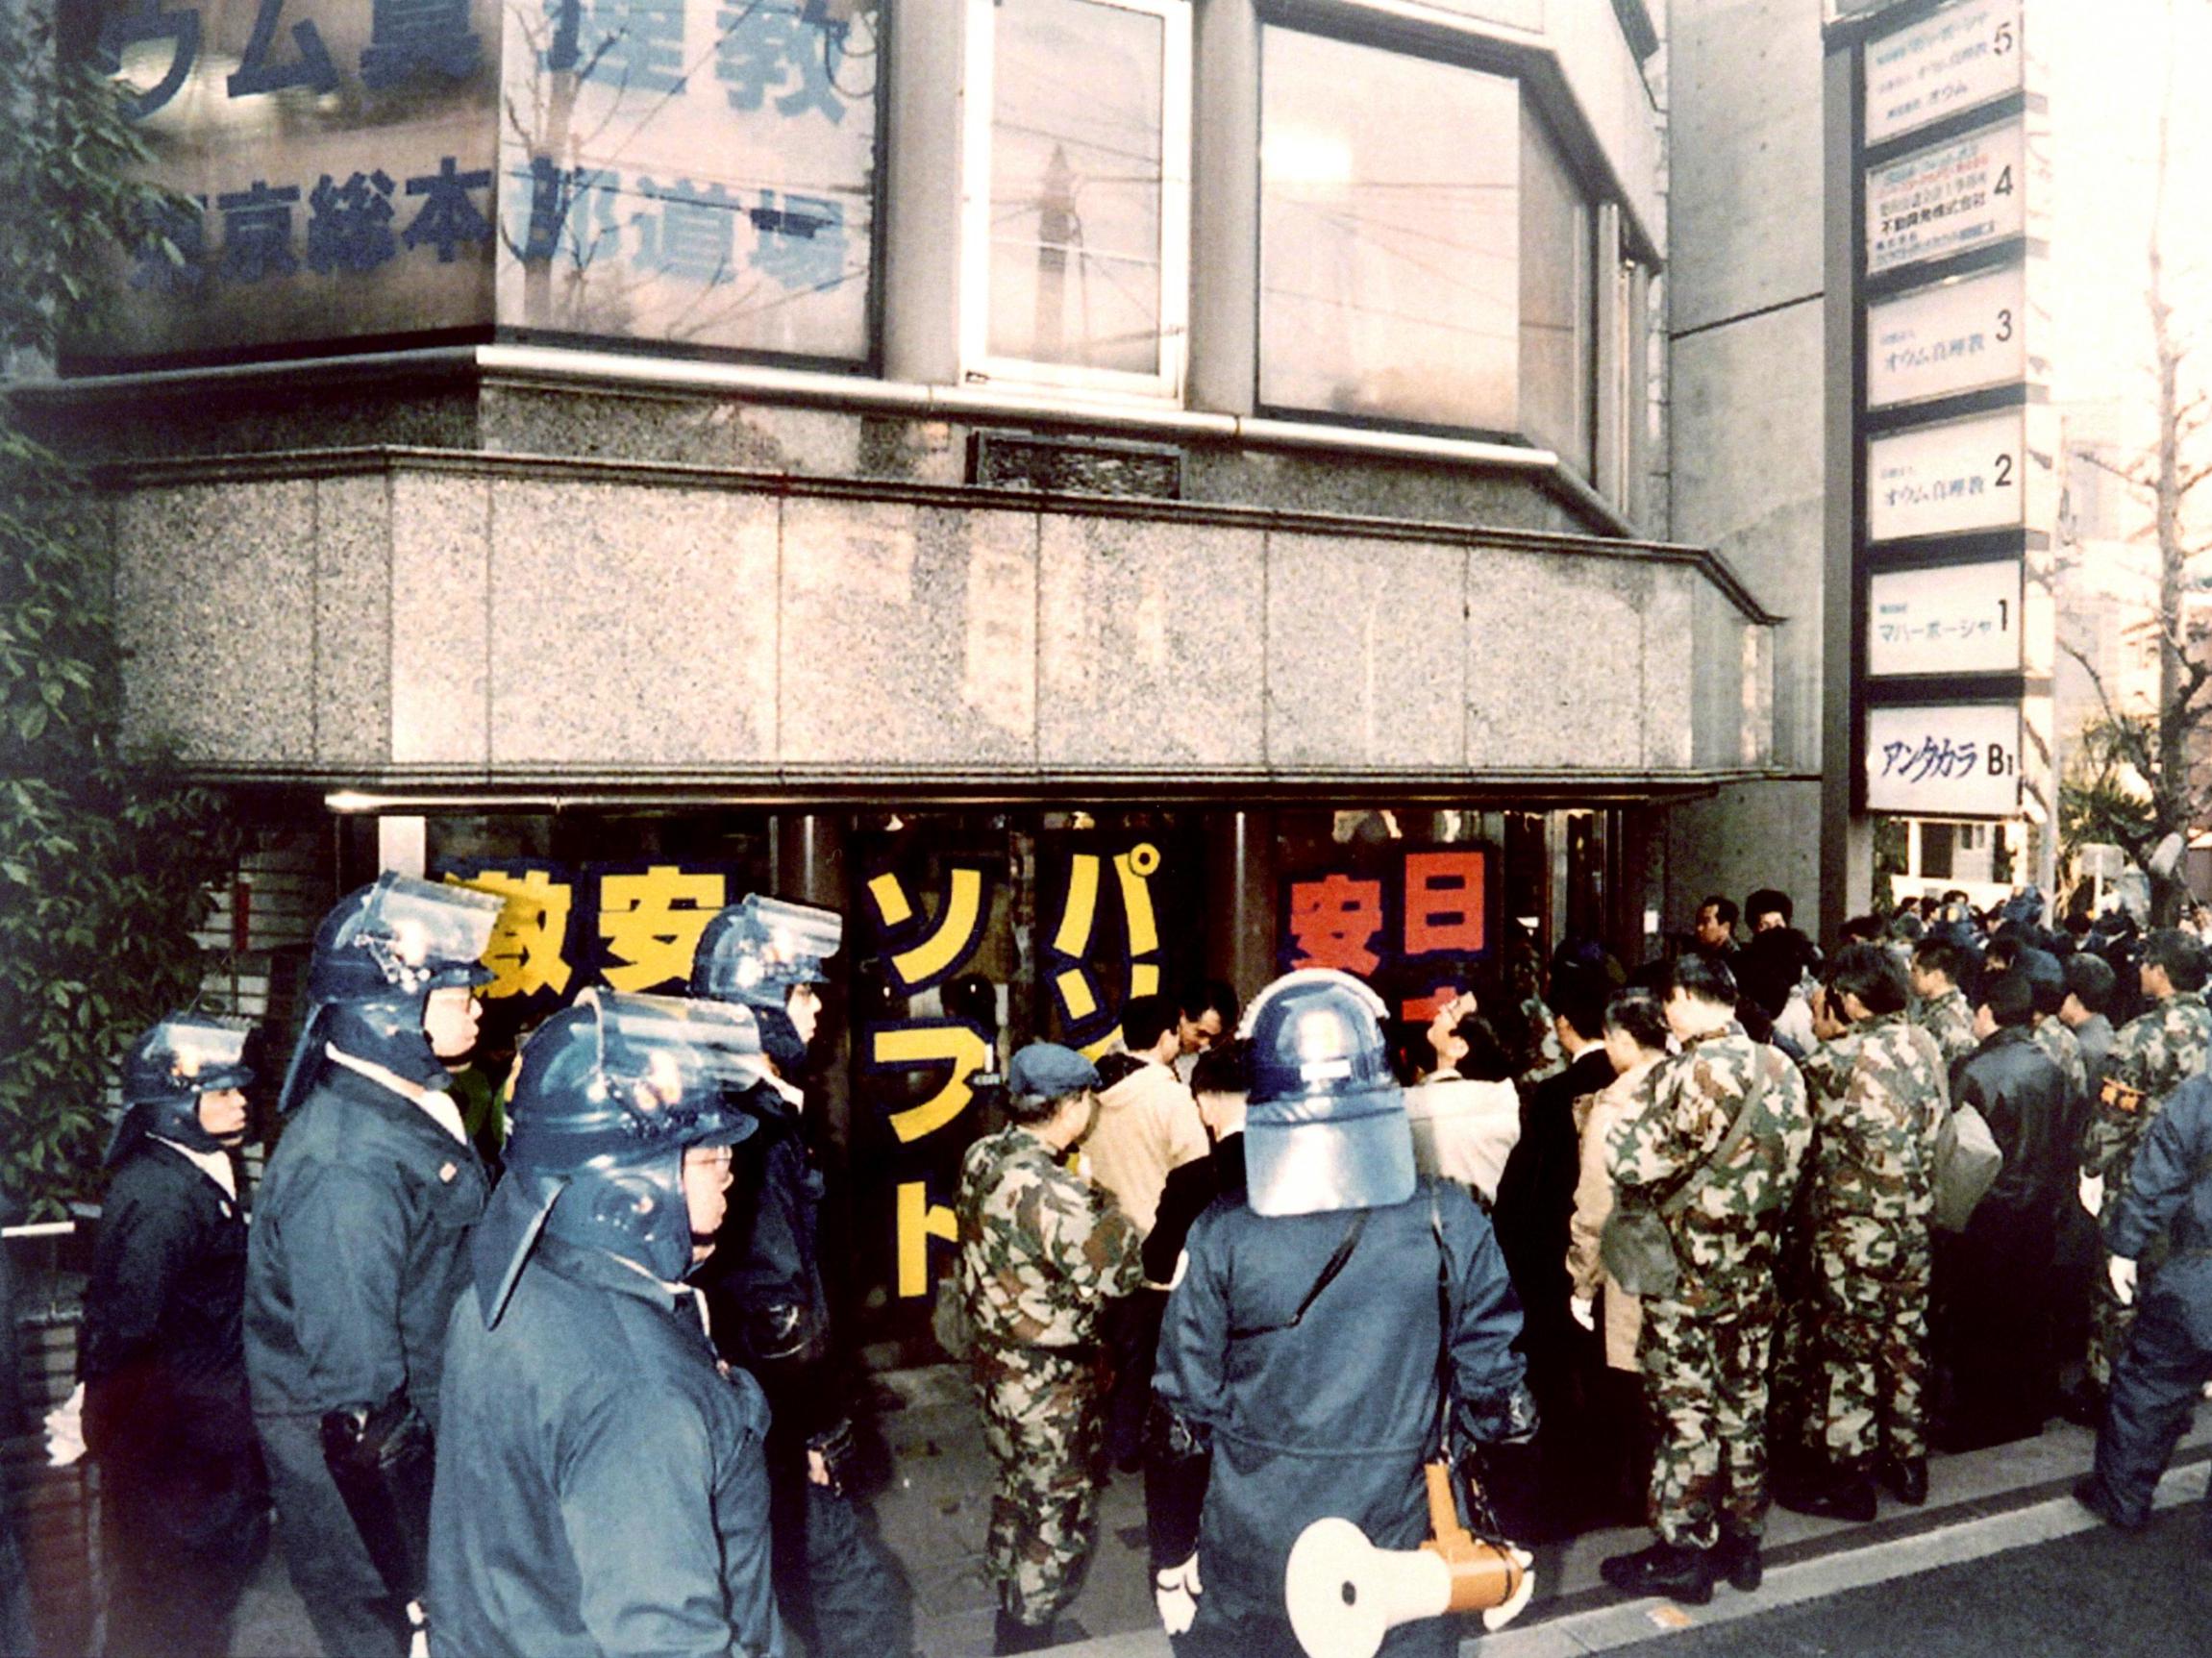 Riot policemen surround the Tokyo headquarters of the controversial Aum Shinrikyo sect